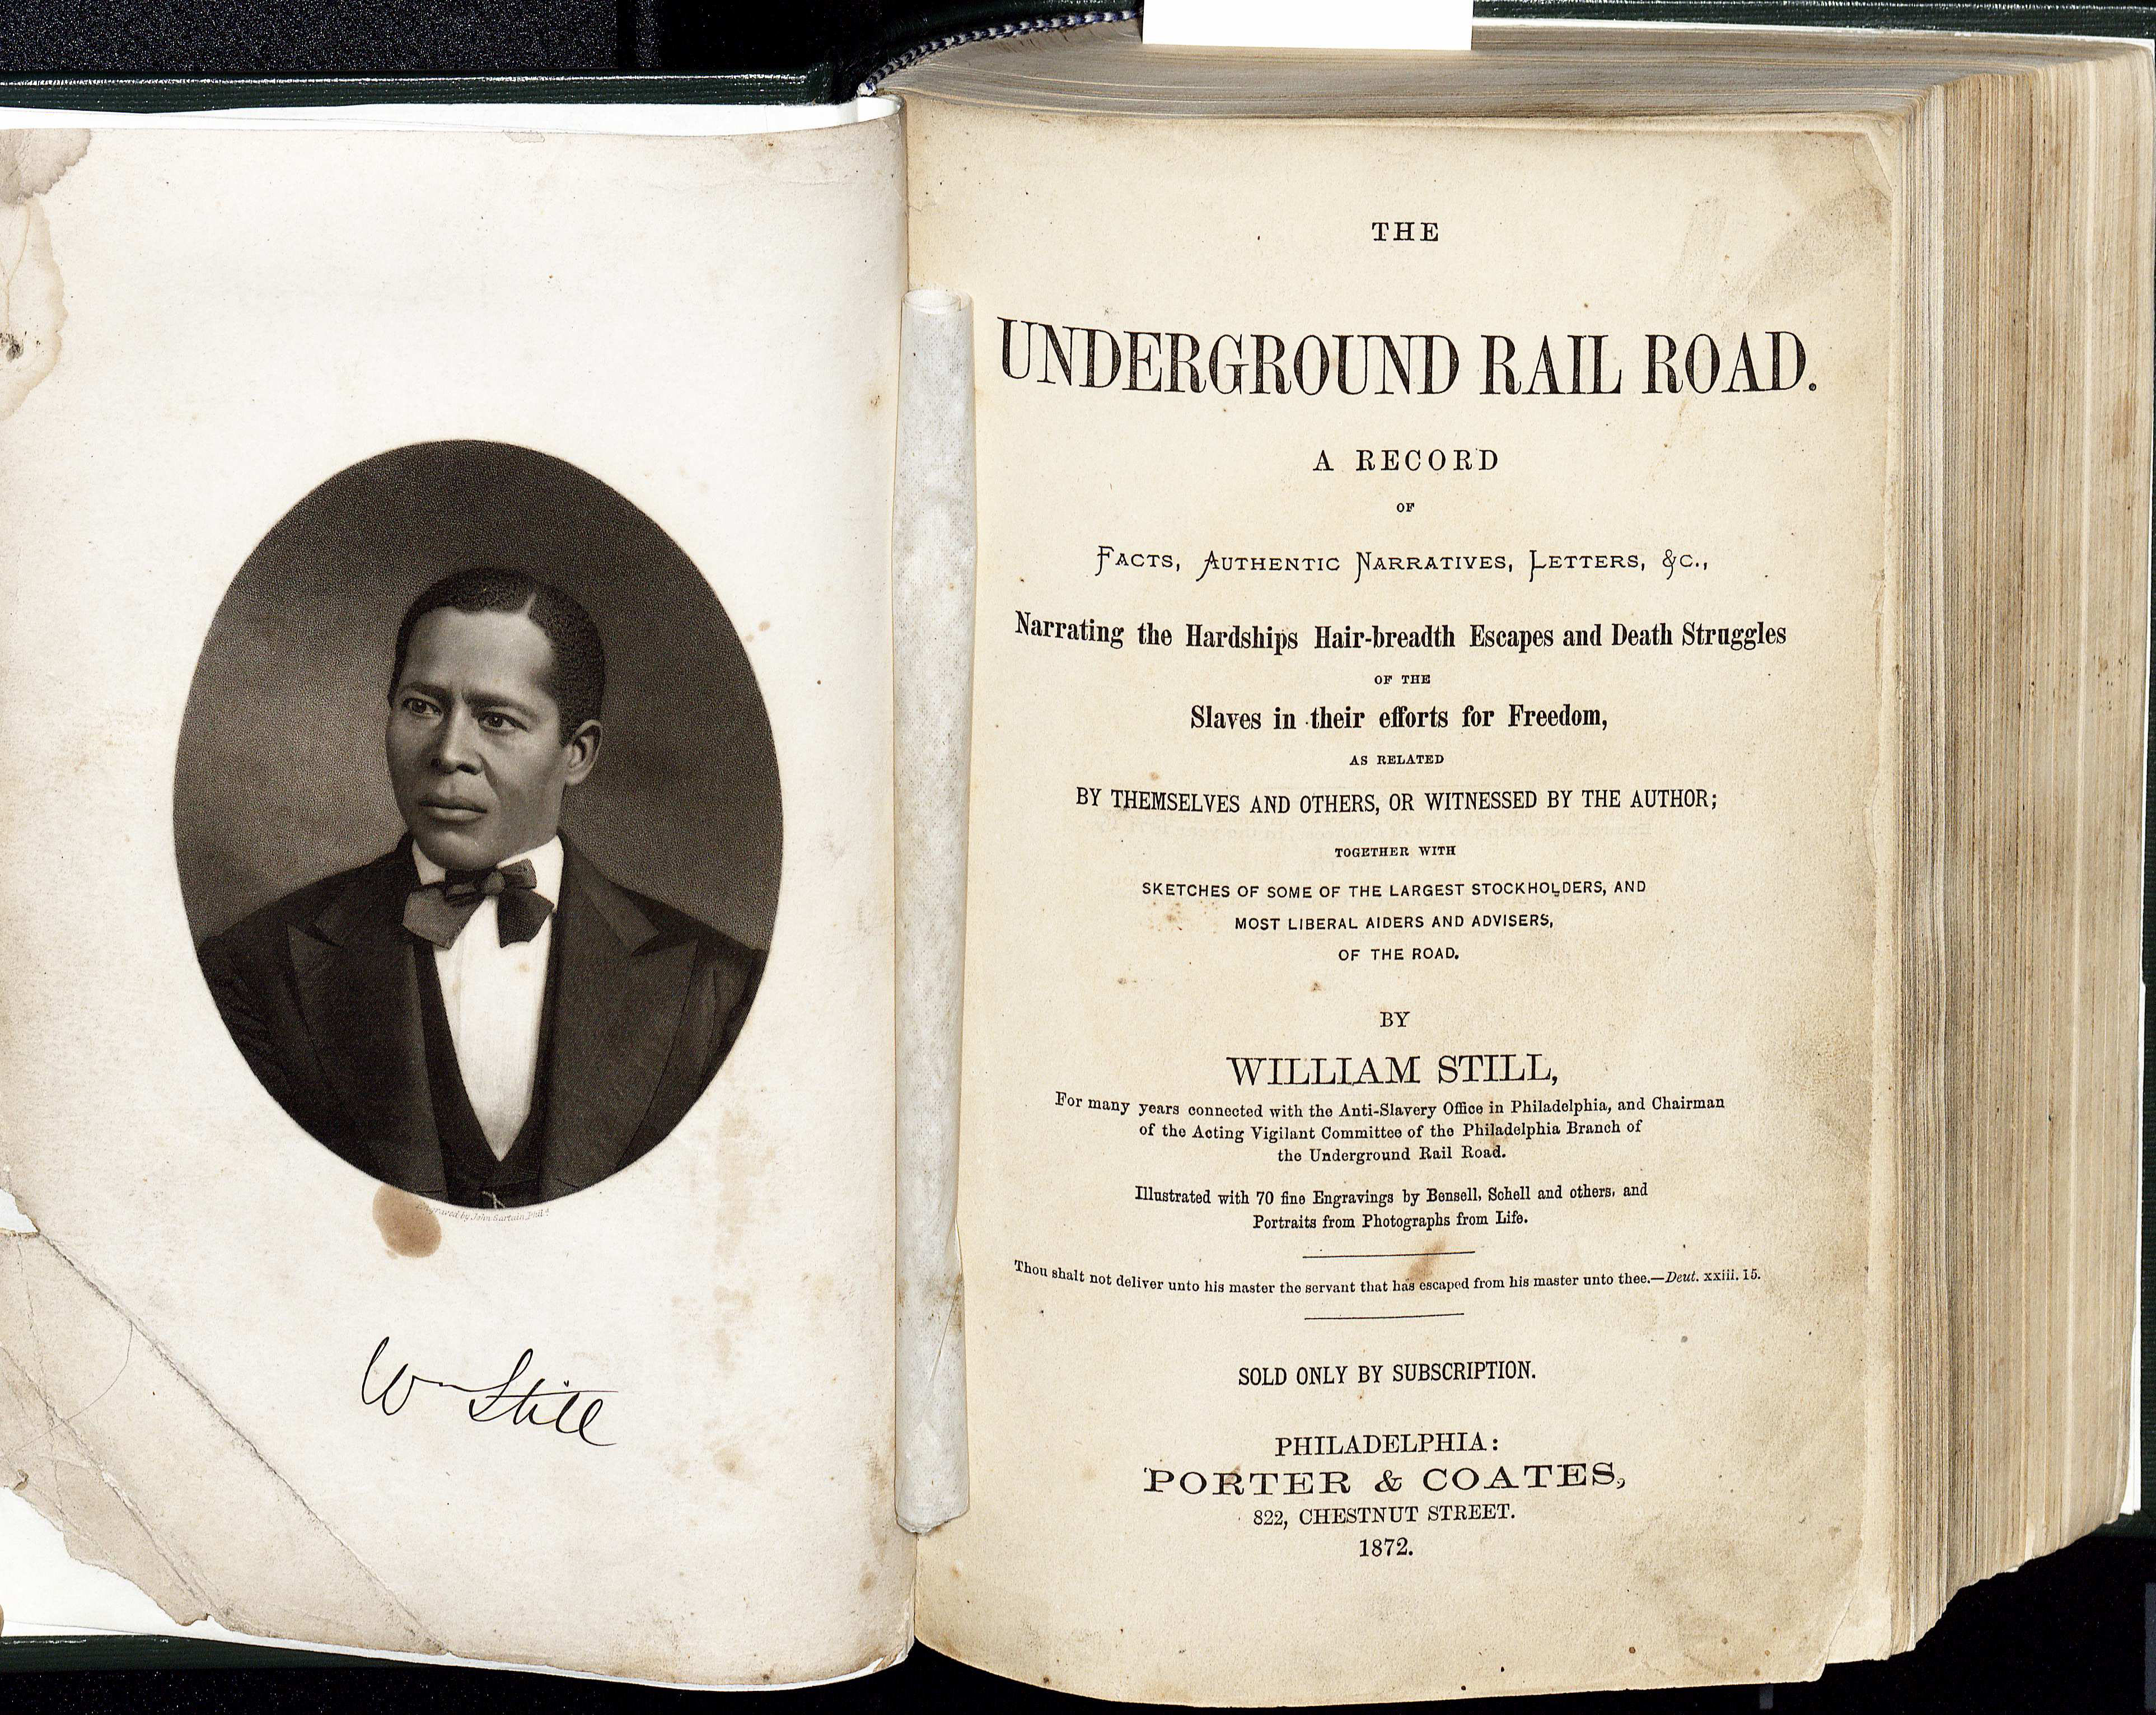 Frontispiece and title page of The Underground Railroad, 1872. (E450 .S85 1872. Image by Petrina Jackson.)